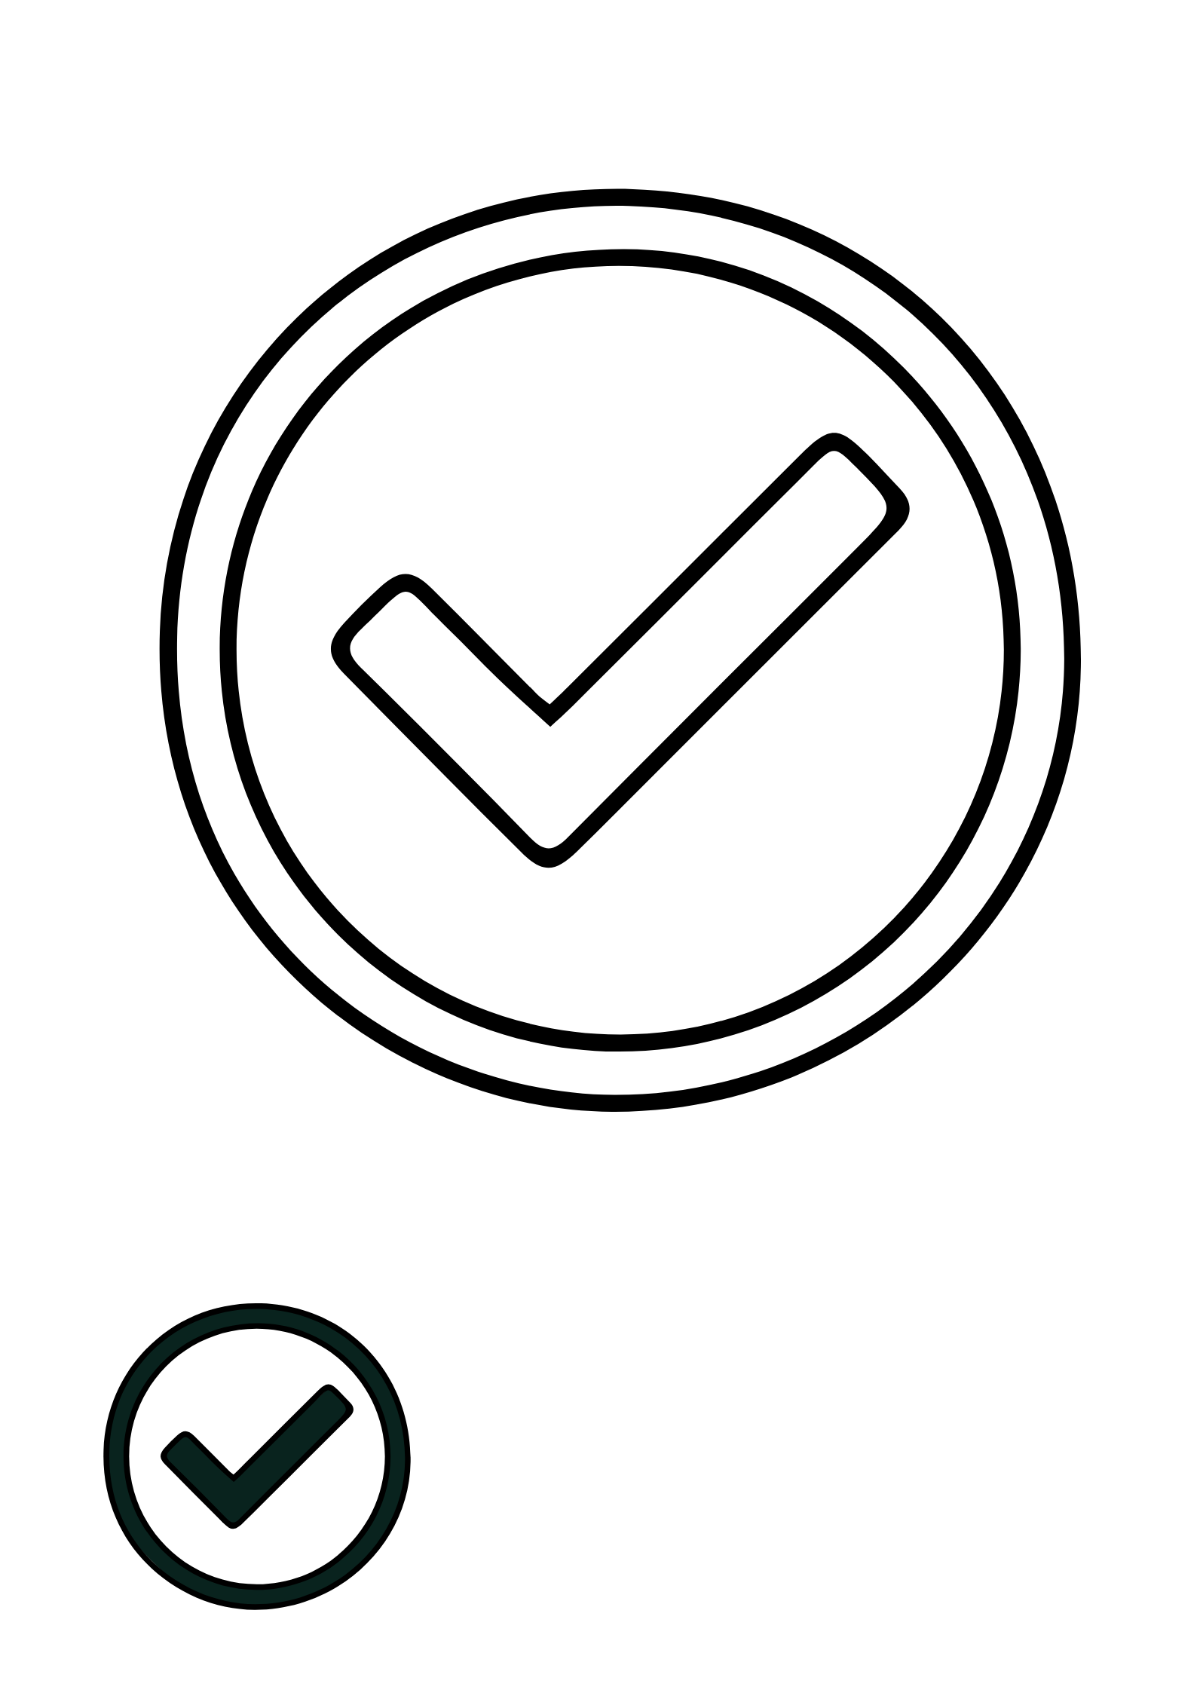 Free Check Mark Outline coloring page Template